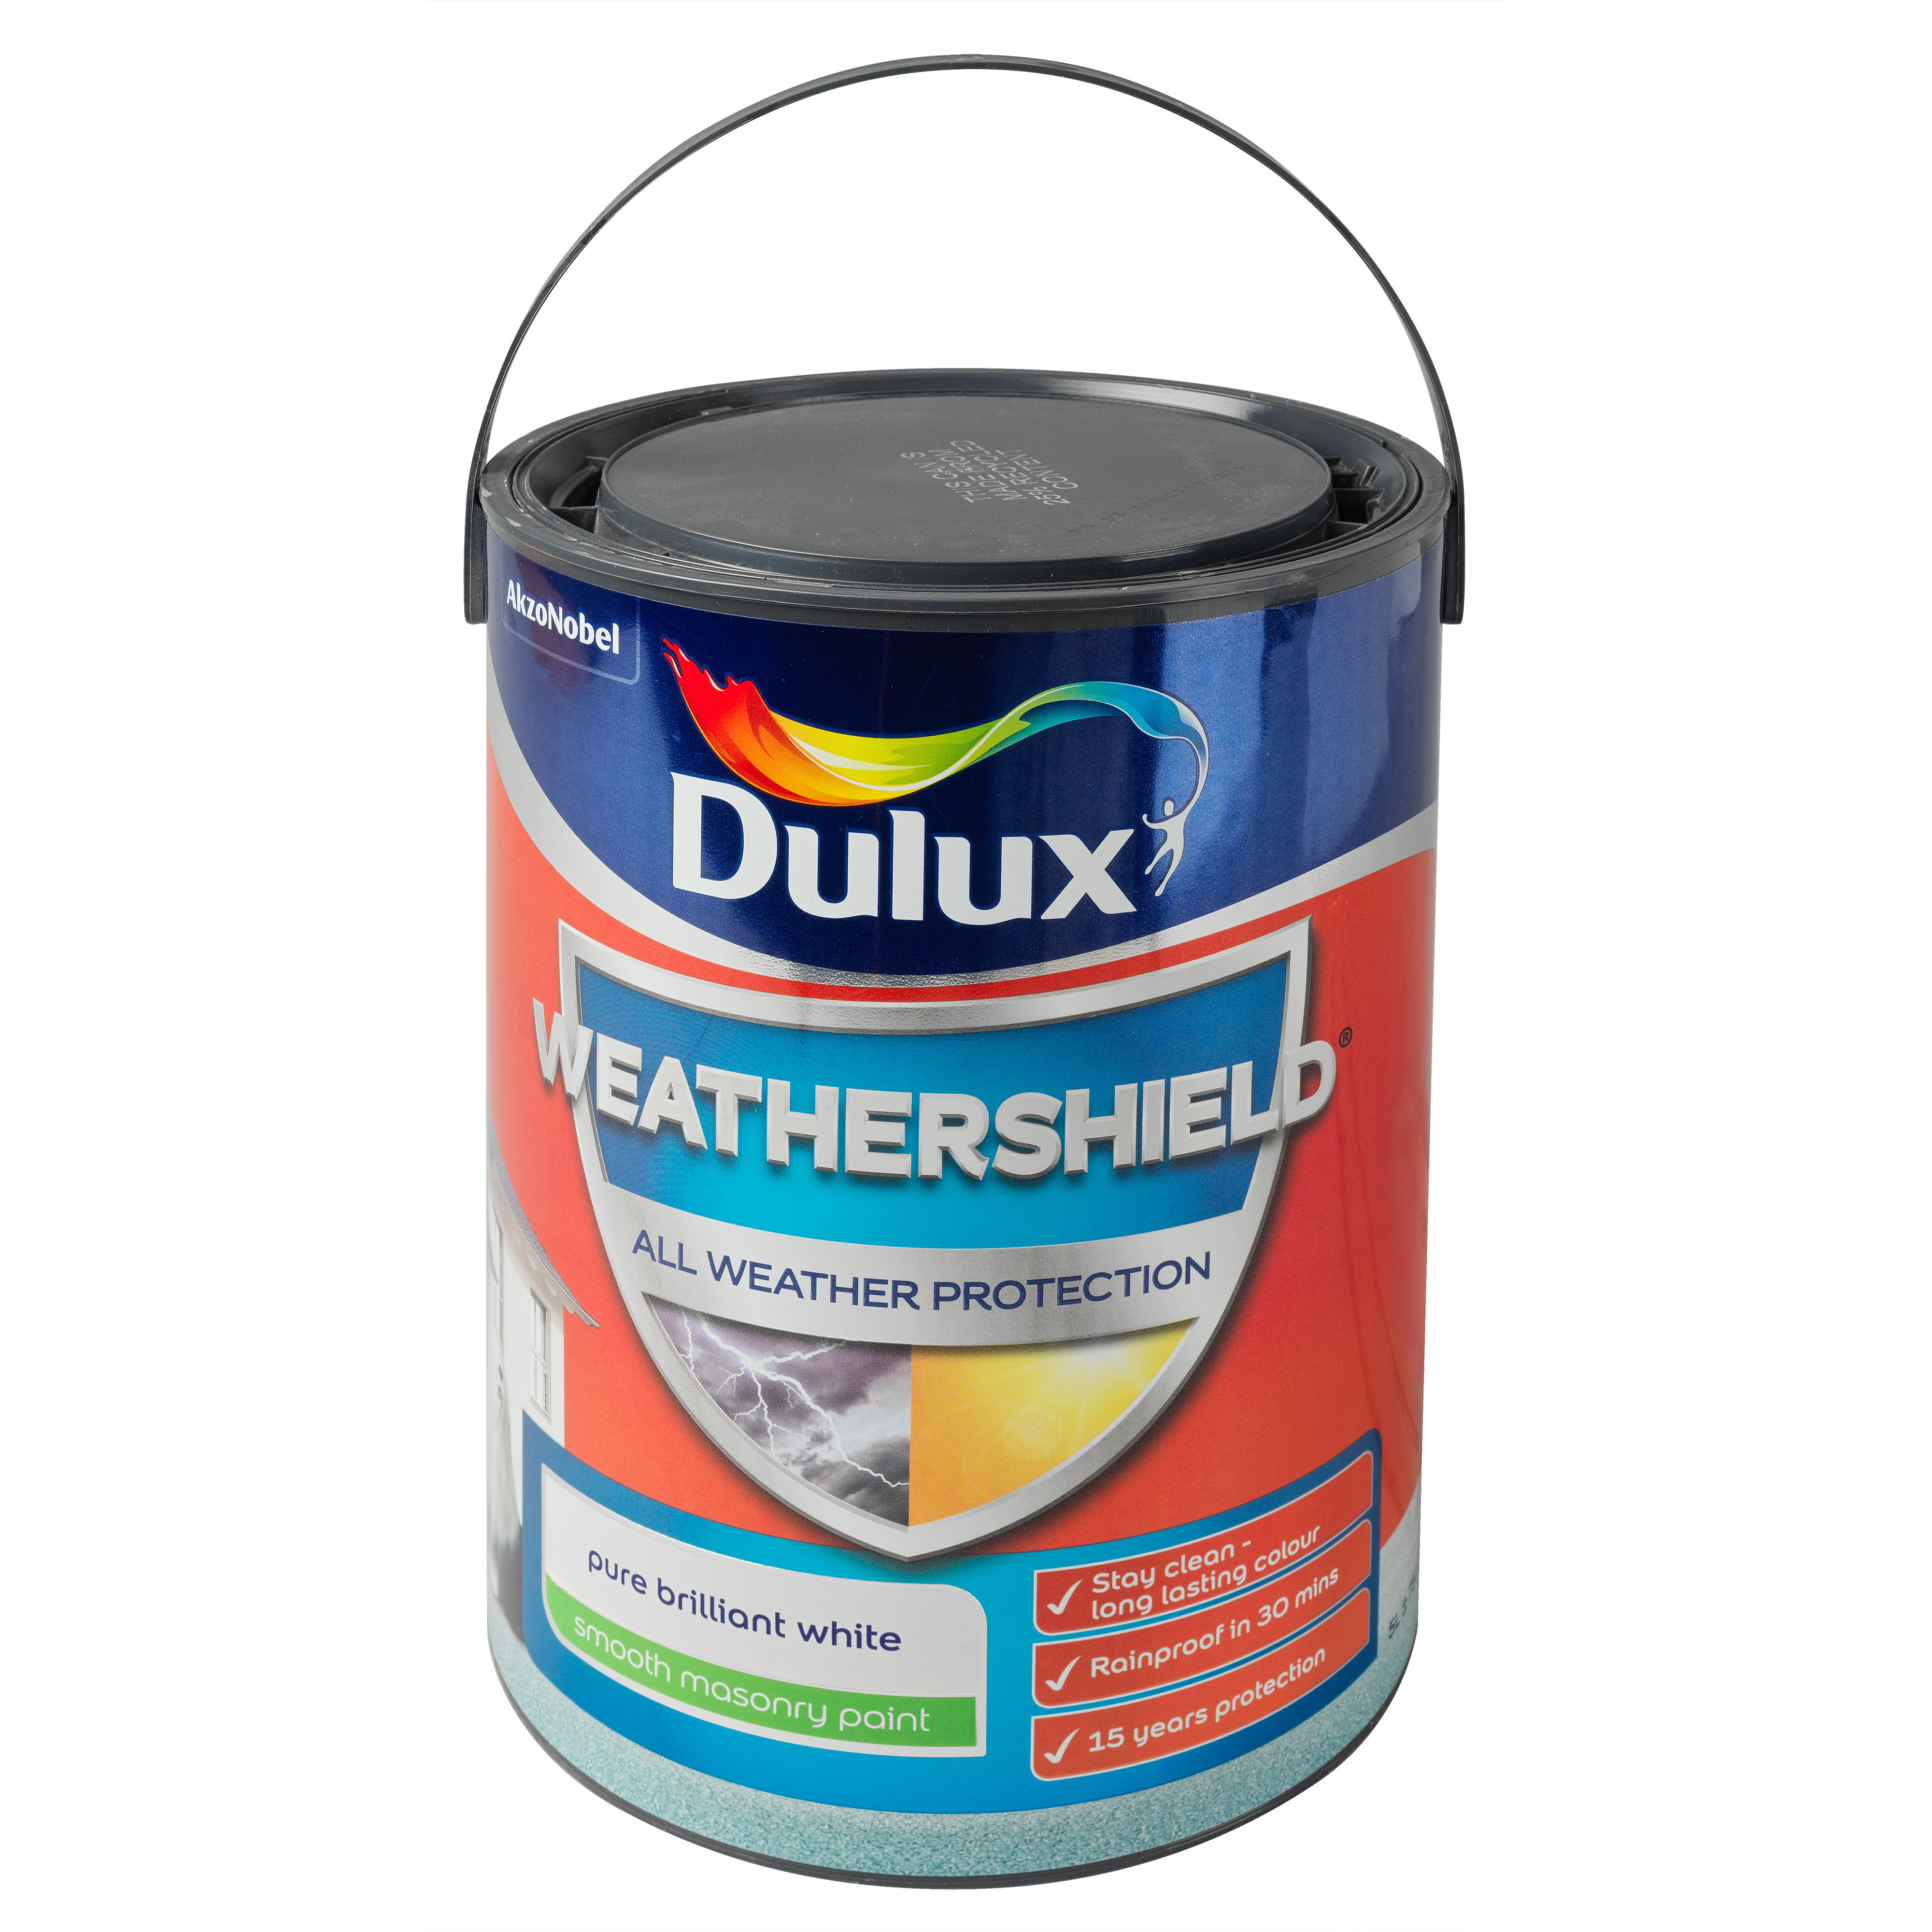 Dulux Weathershield All Weather Protection Smooth Masonry Paint - Pure Brilliant White (5L)